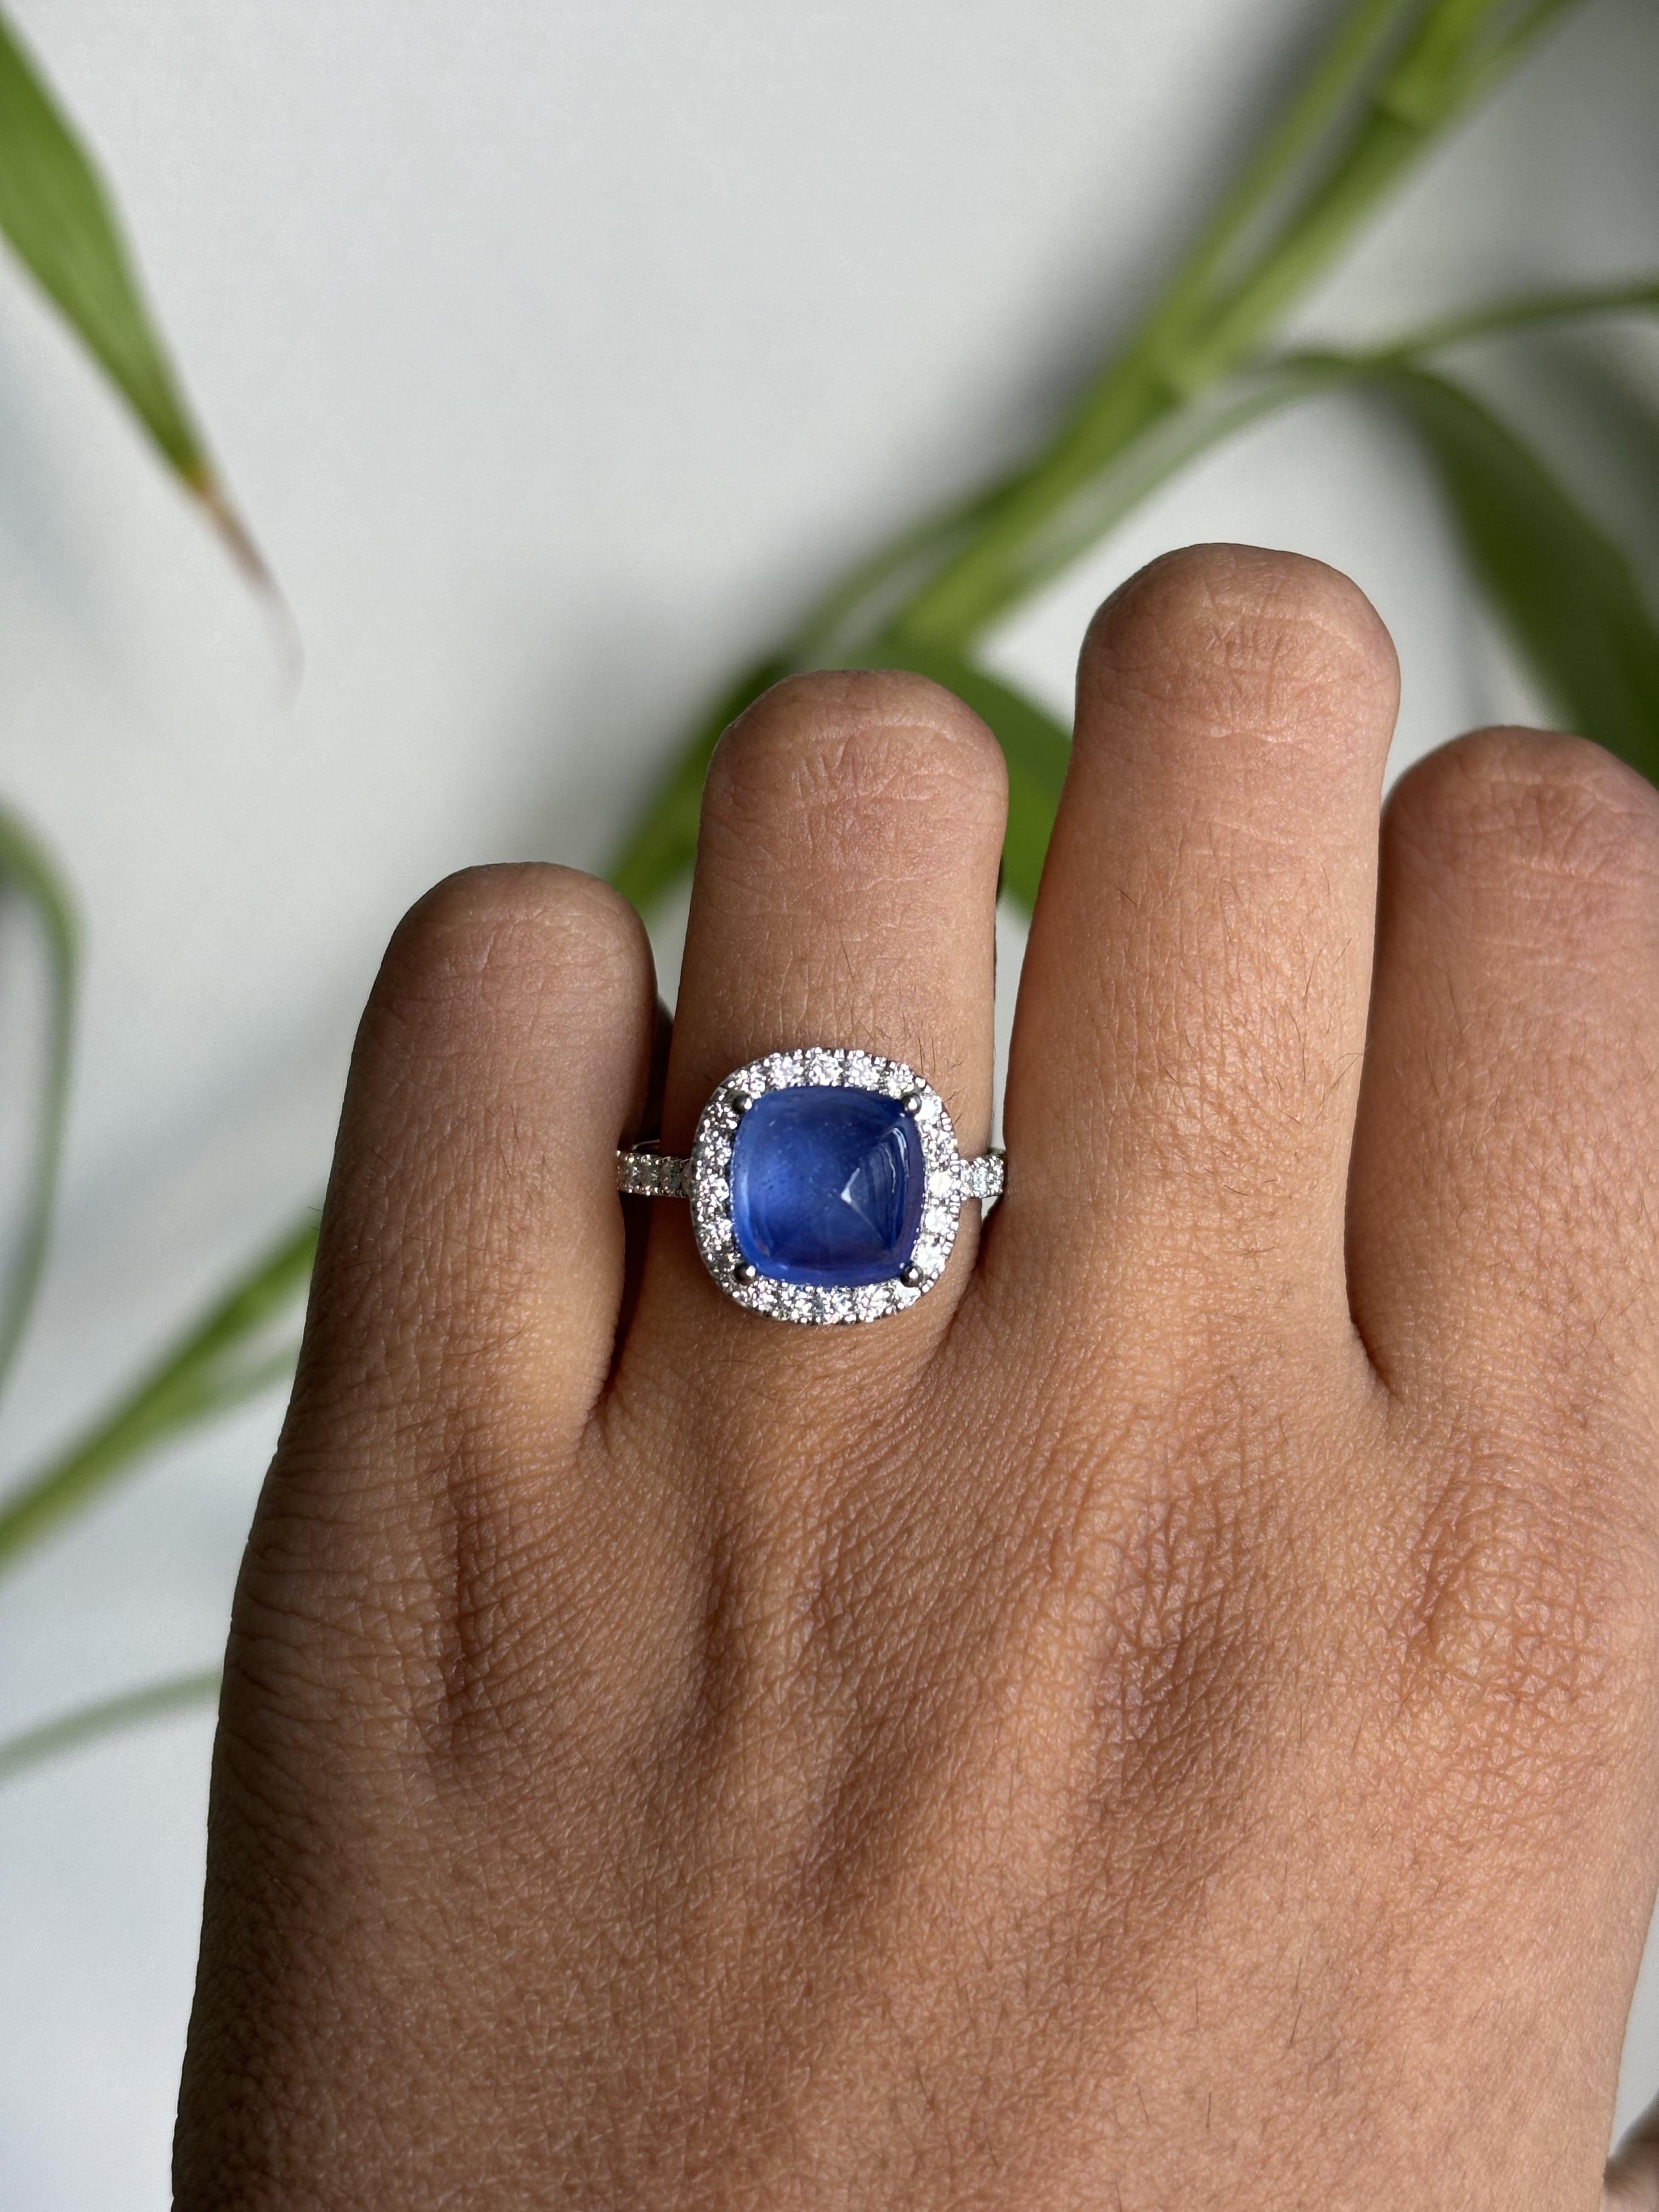 Sugarloaf Cabochon 4.23 Carat Sugarloaf Ceylon Sapphire Ring with Halo Diamonds in 14K White Gold For Sale